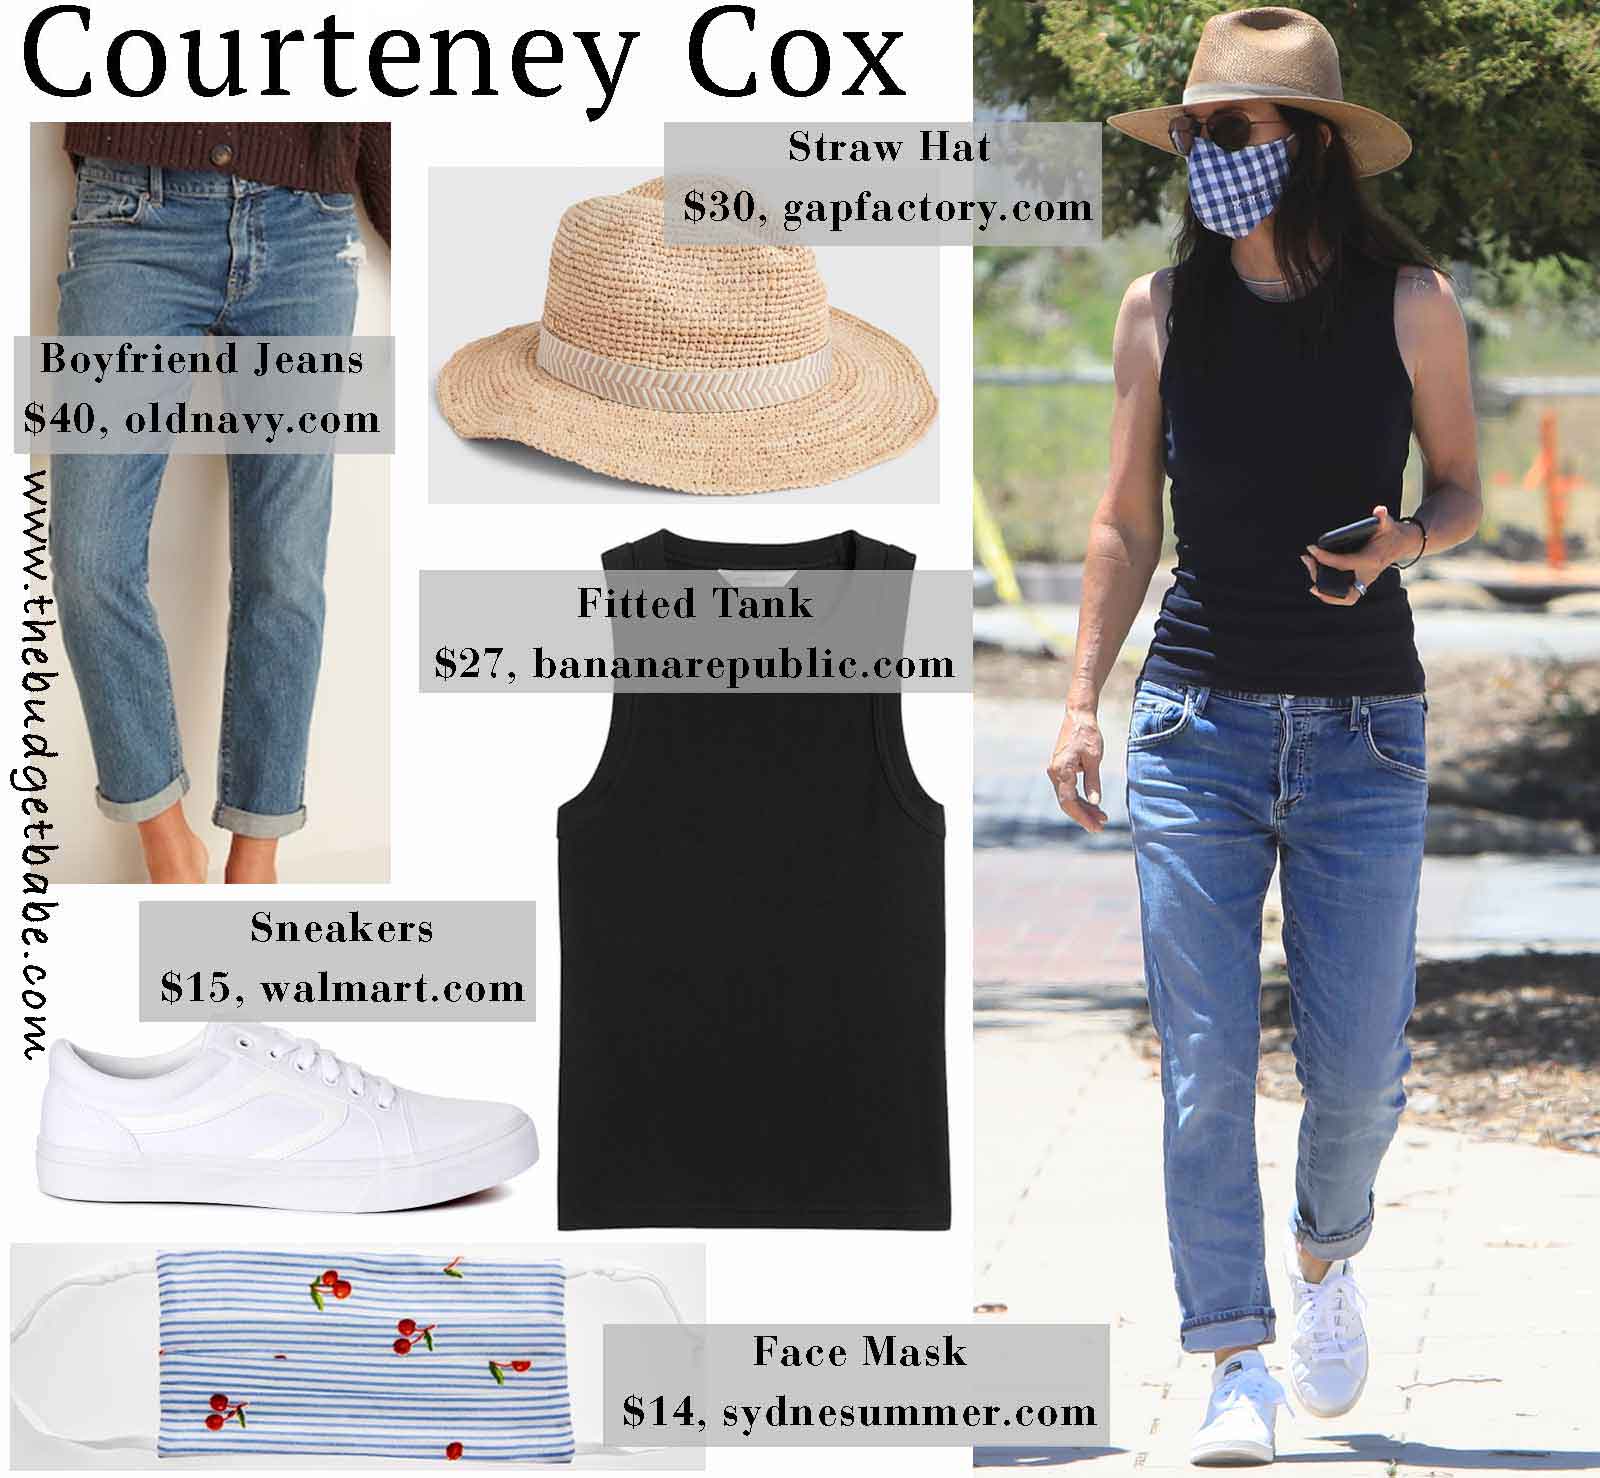 Courteney Cox hits the farmer's market in a straw hat and gingham face mask.